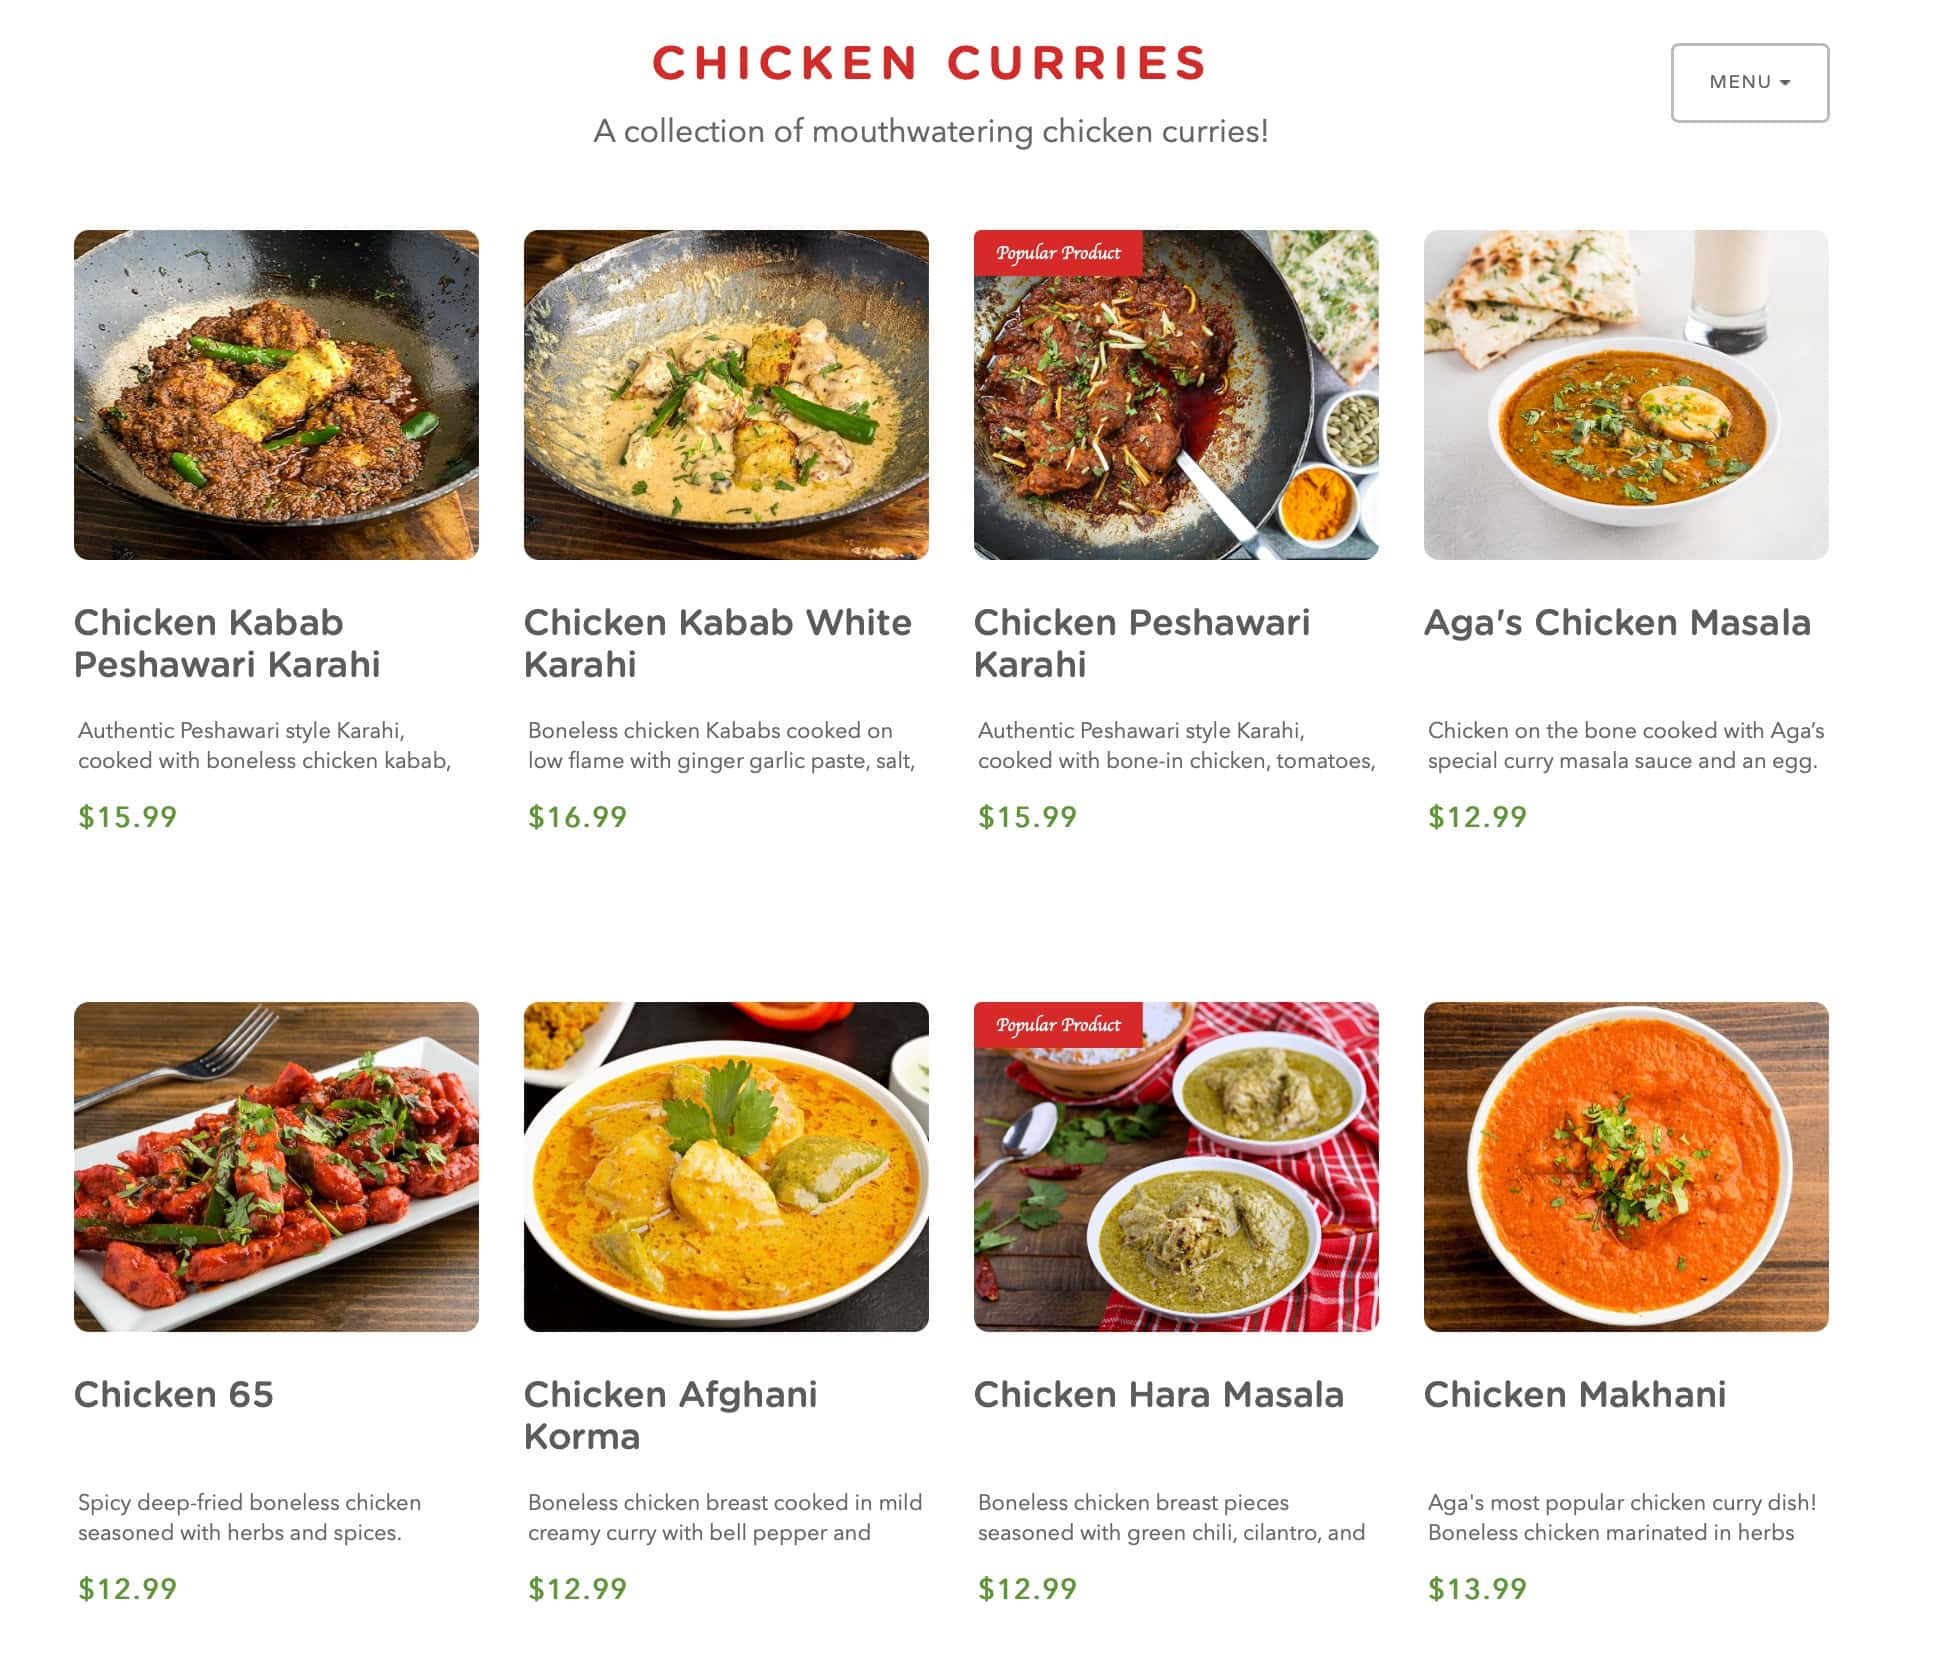 Aga's Restaurant and Catering Chicken Curries Menu